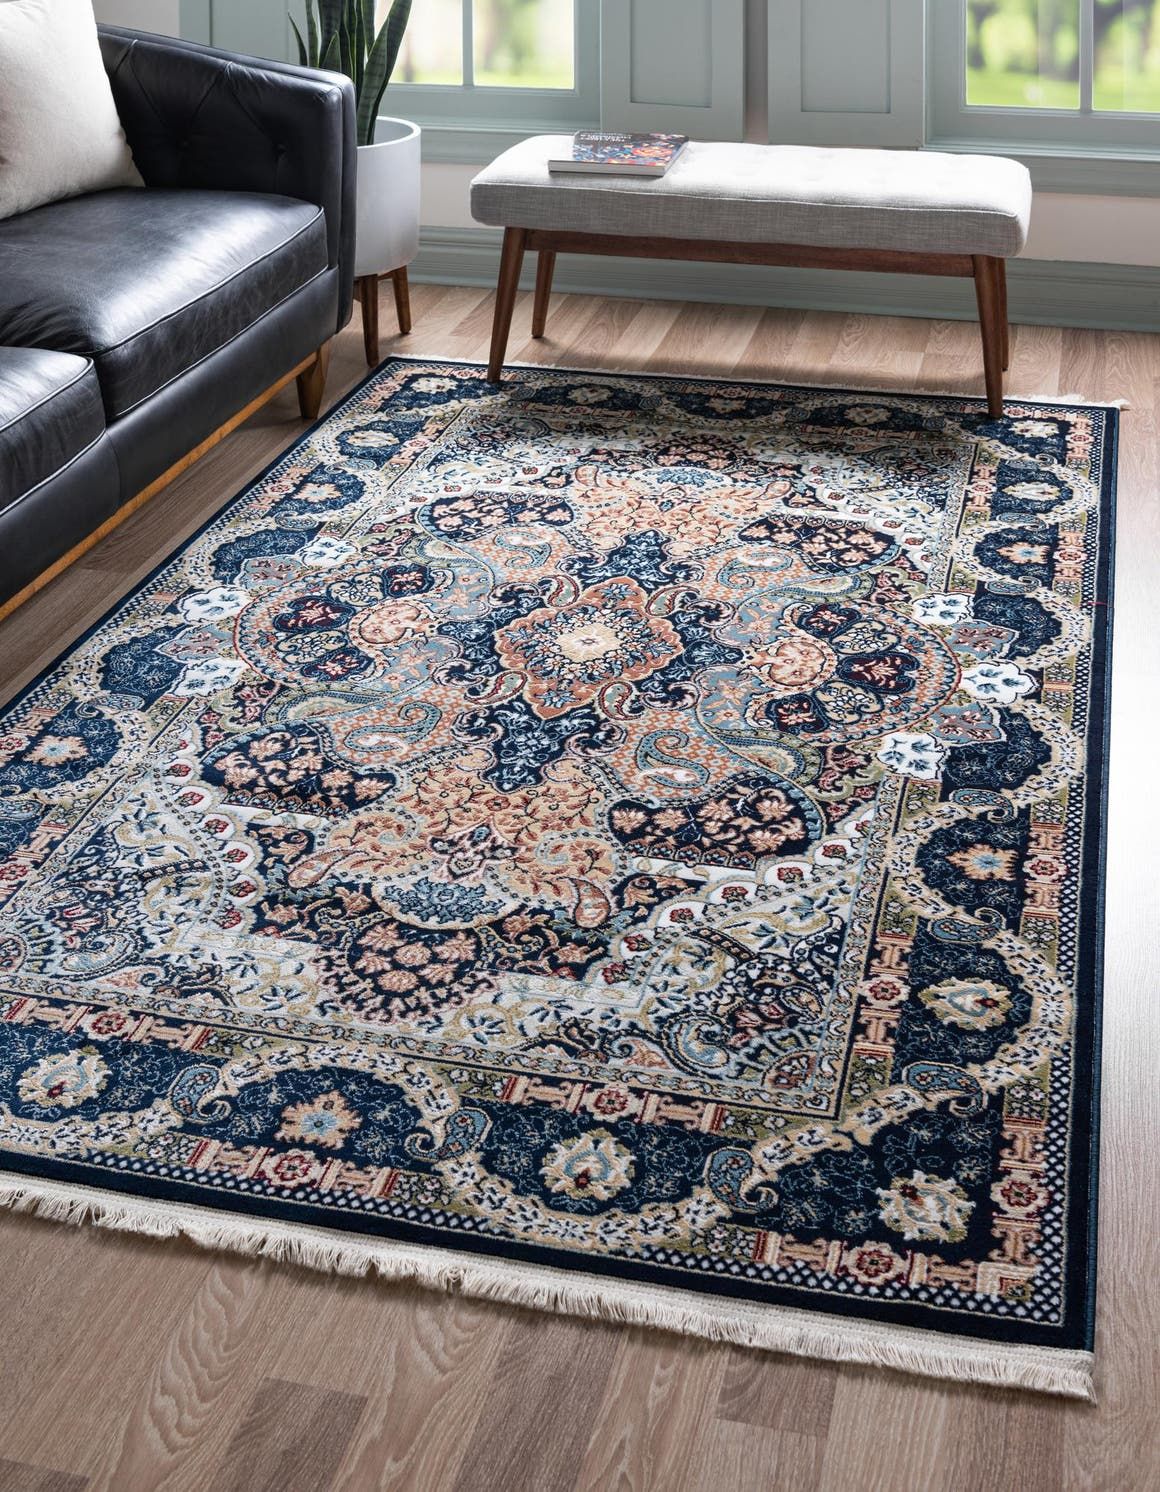 Enhance Your Space with a Navy Blue Rug